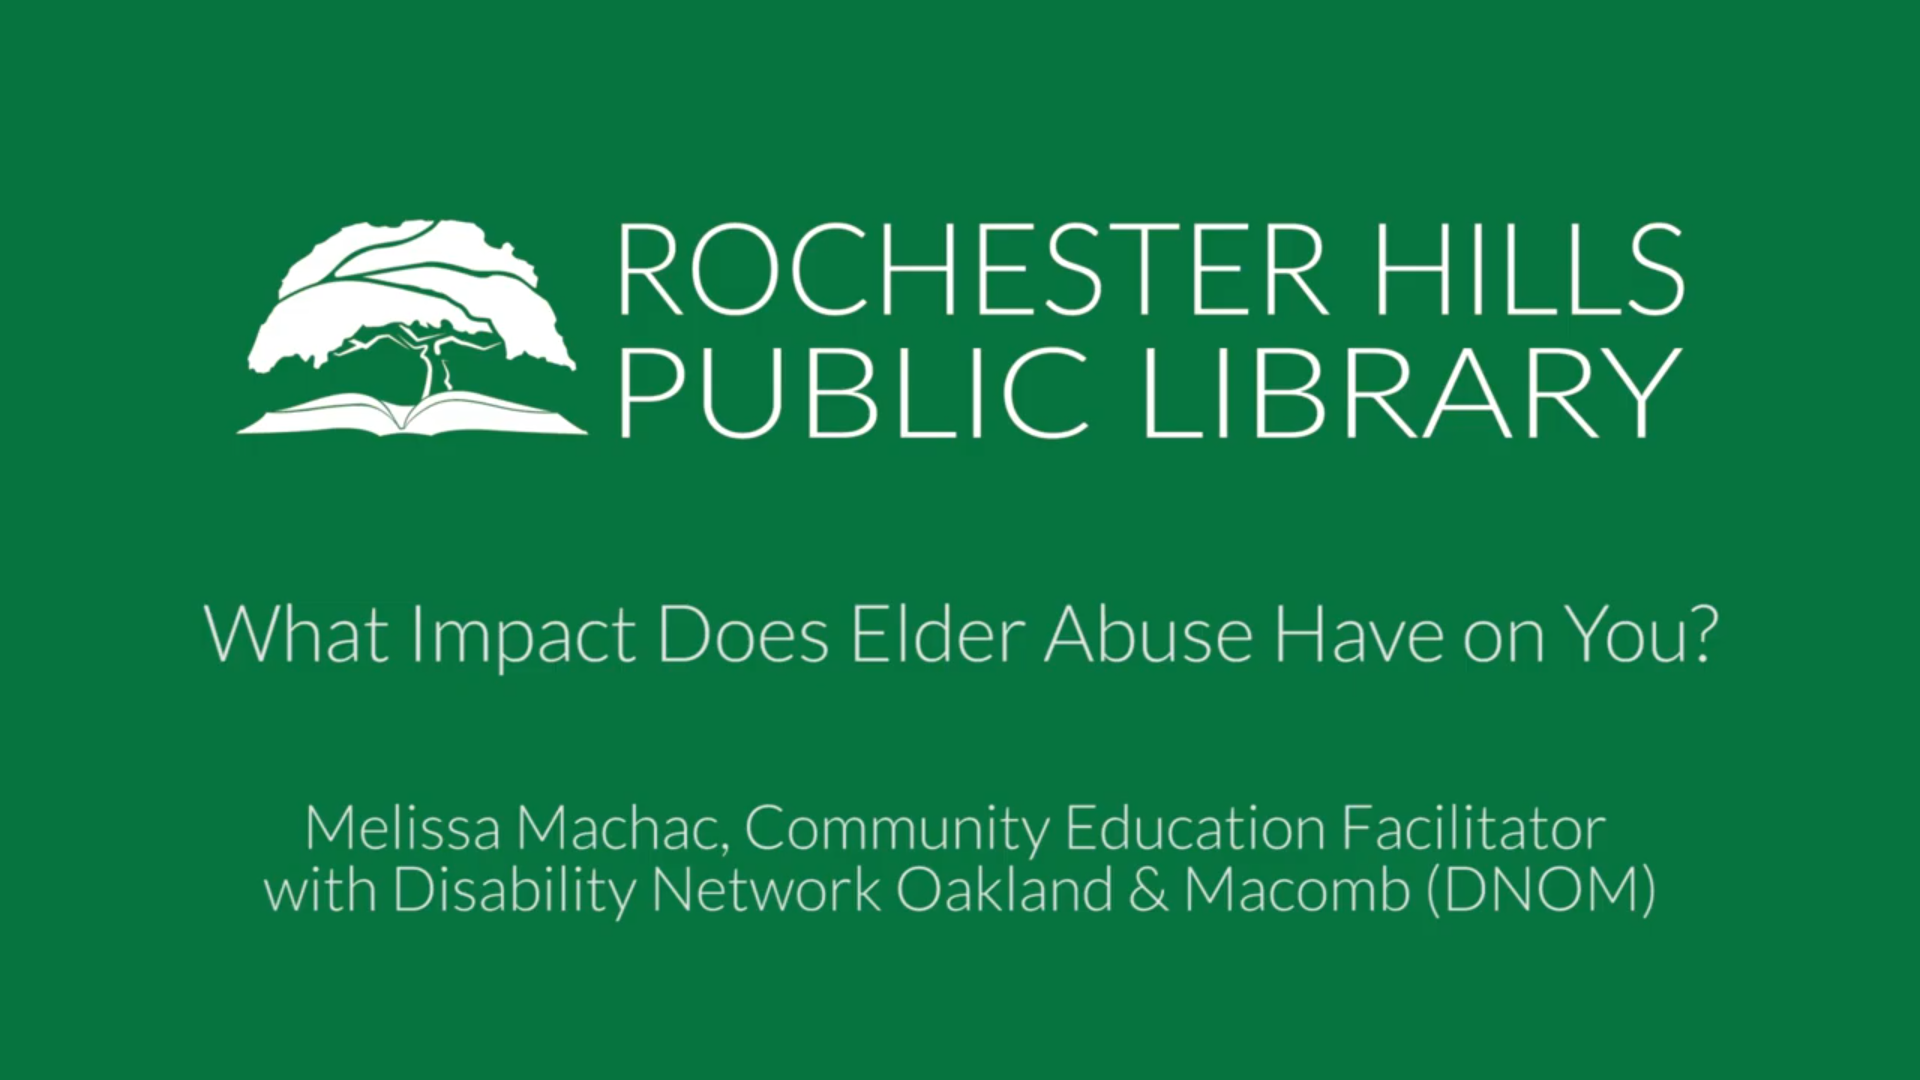 What Impact Does Elder Abuse Have on You?